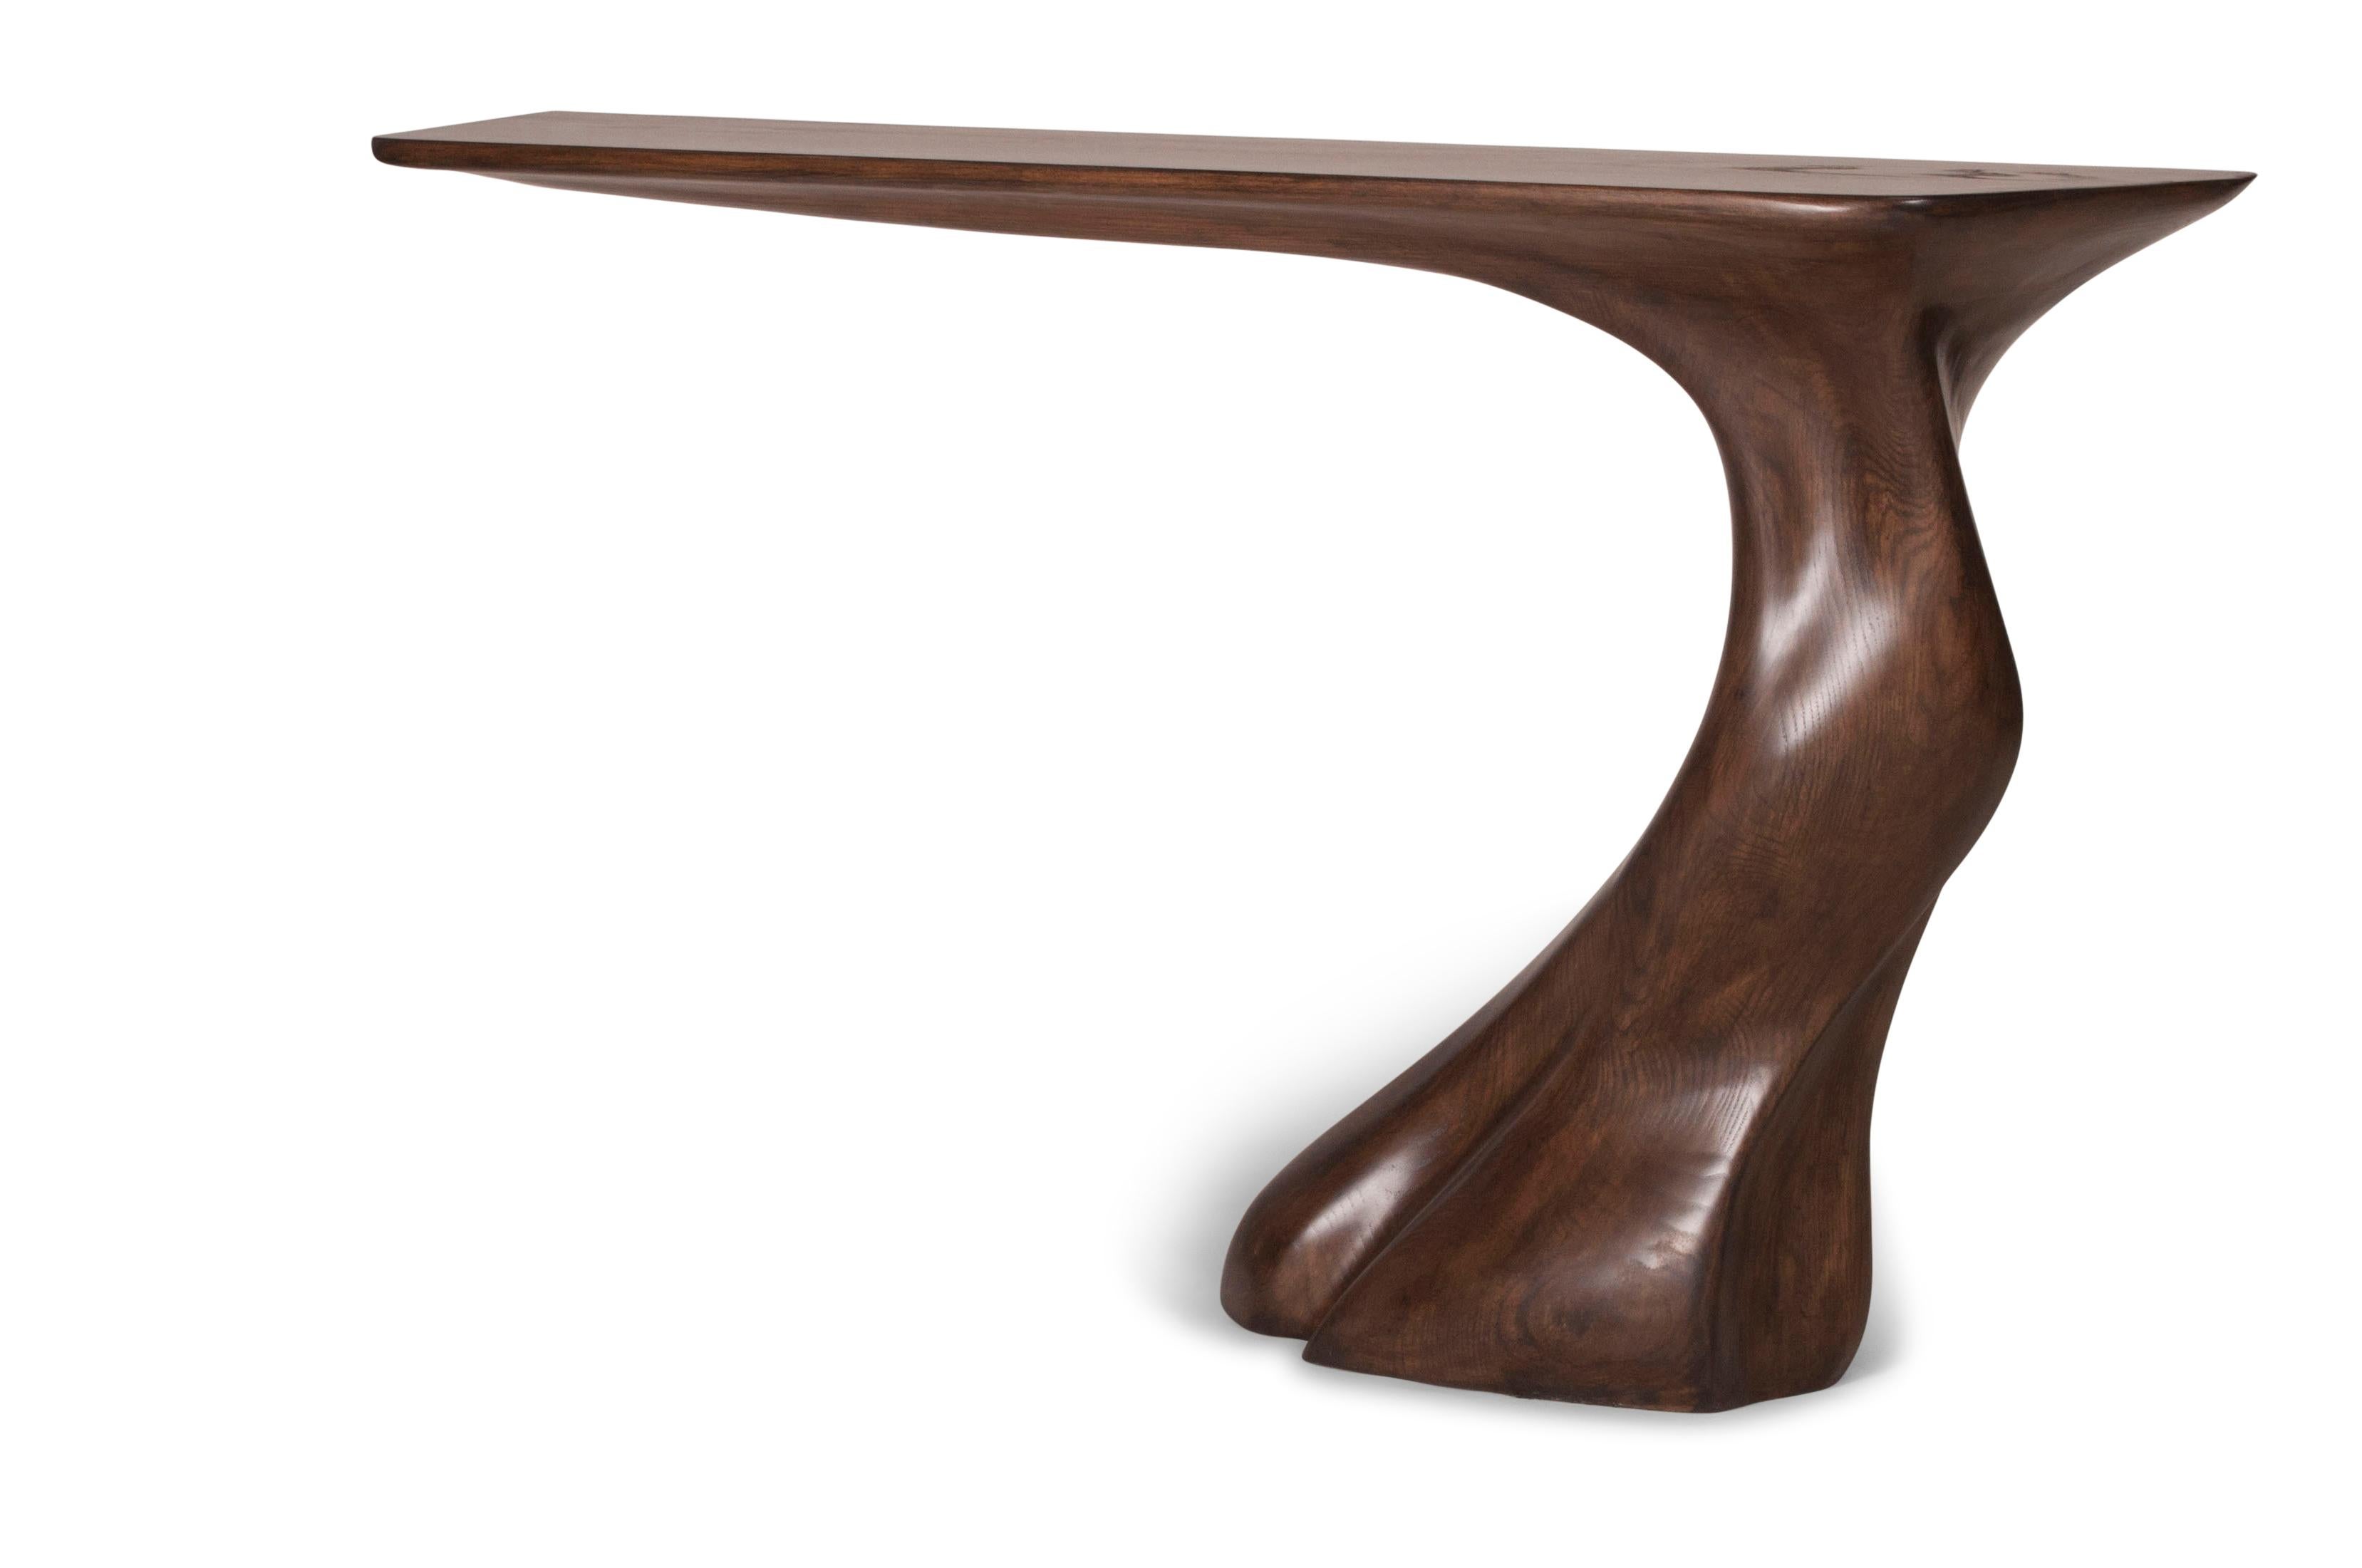 Modern Amorph Frolic Wall Mounted console table in Graphite Walnut stain on Ash wood For Sale